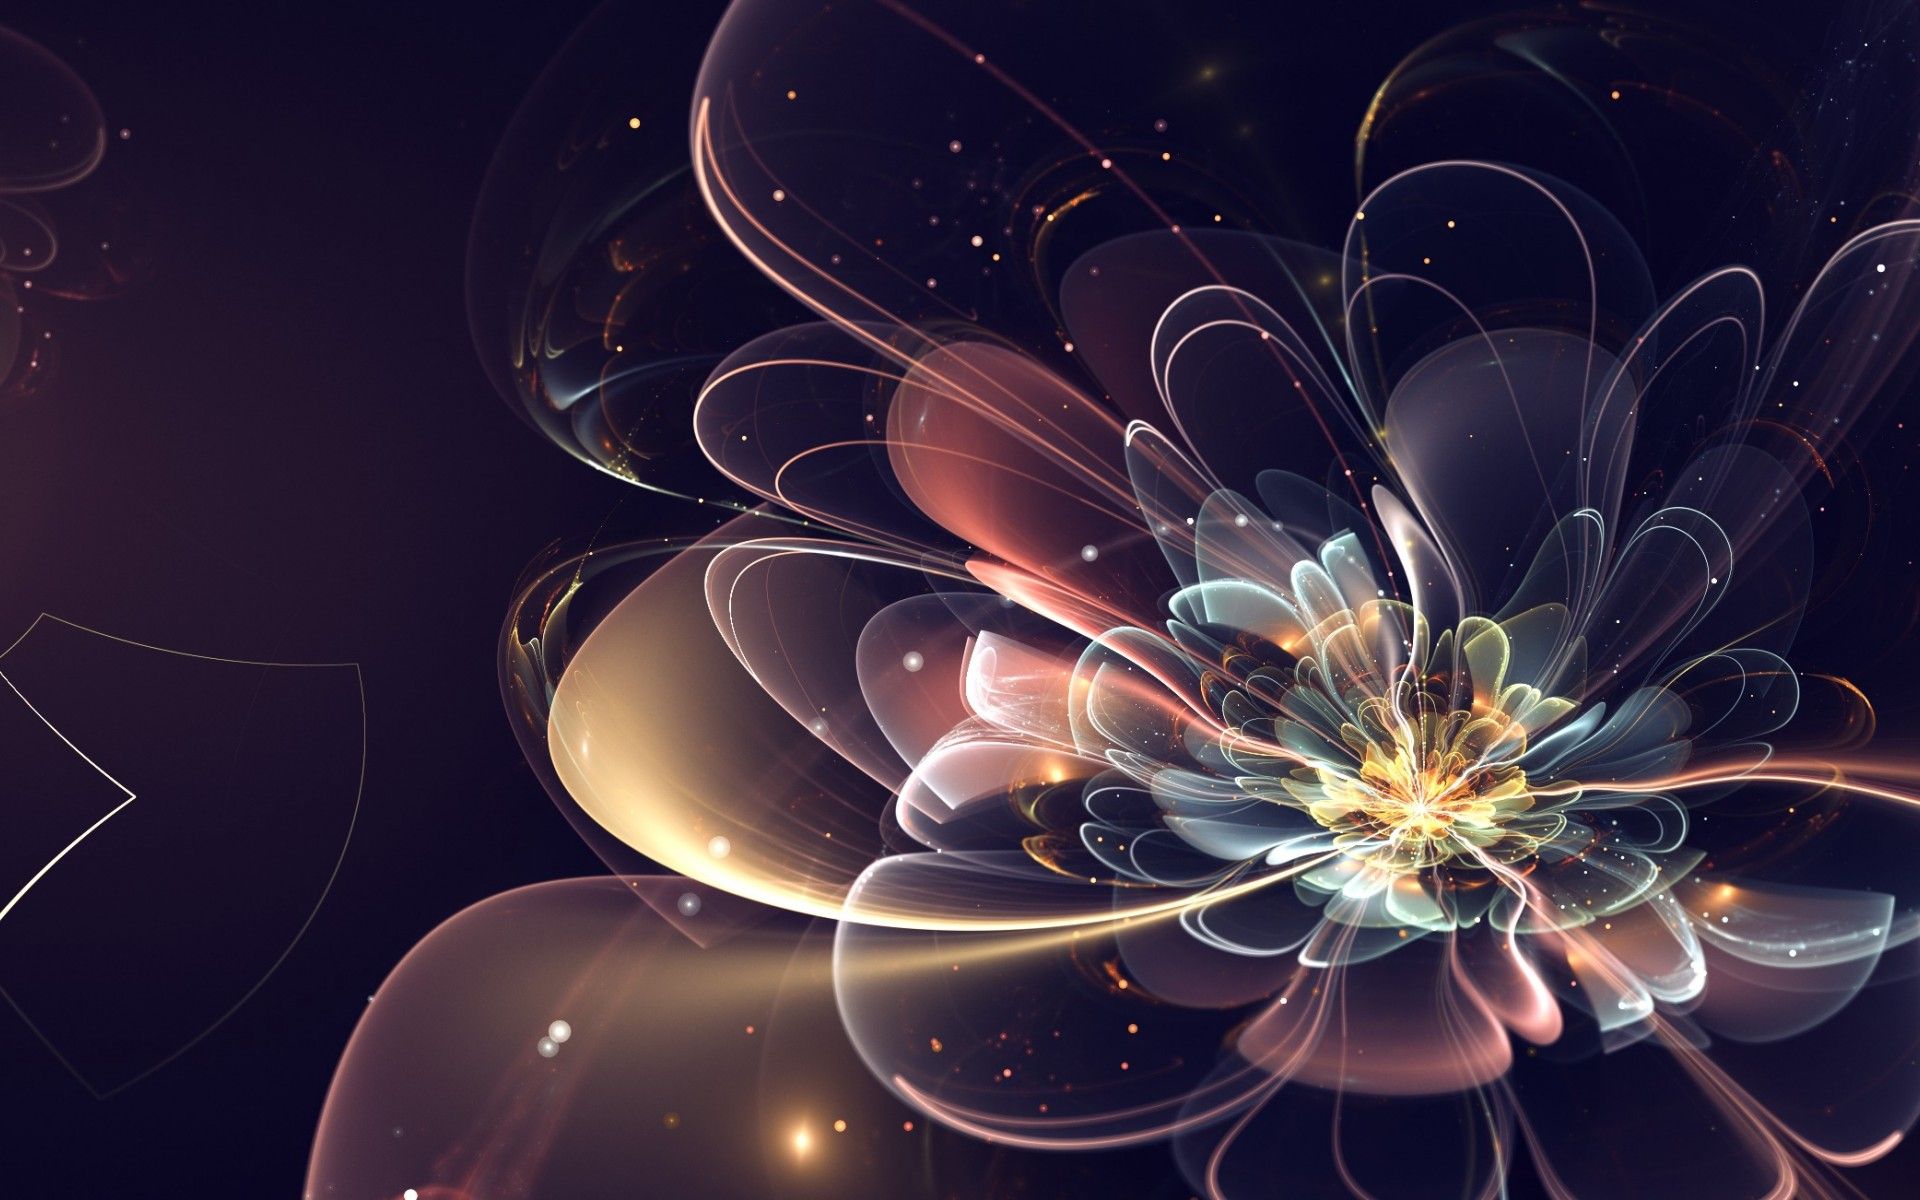 Download Wallpaper x d Abstract Fractal Bright New | wallpapers ...